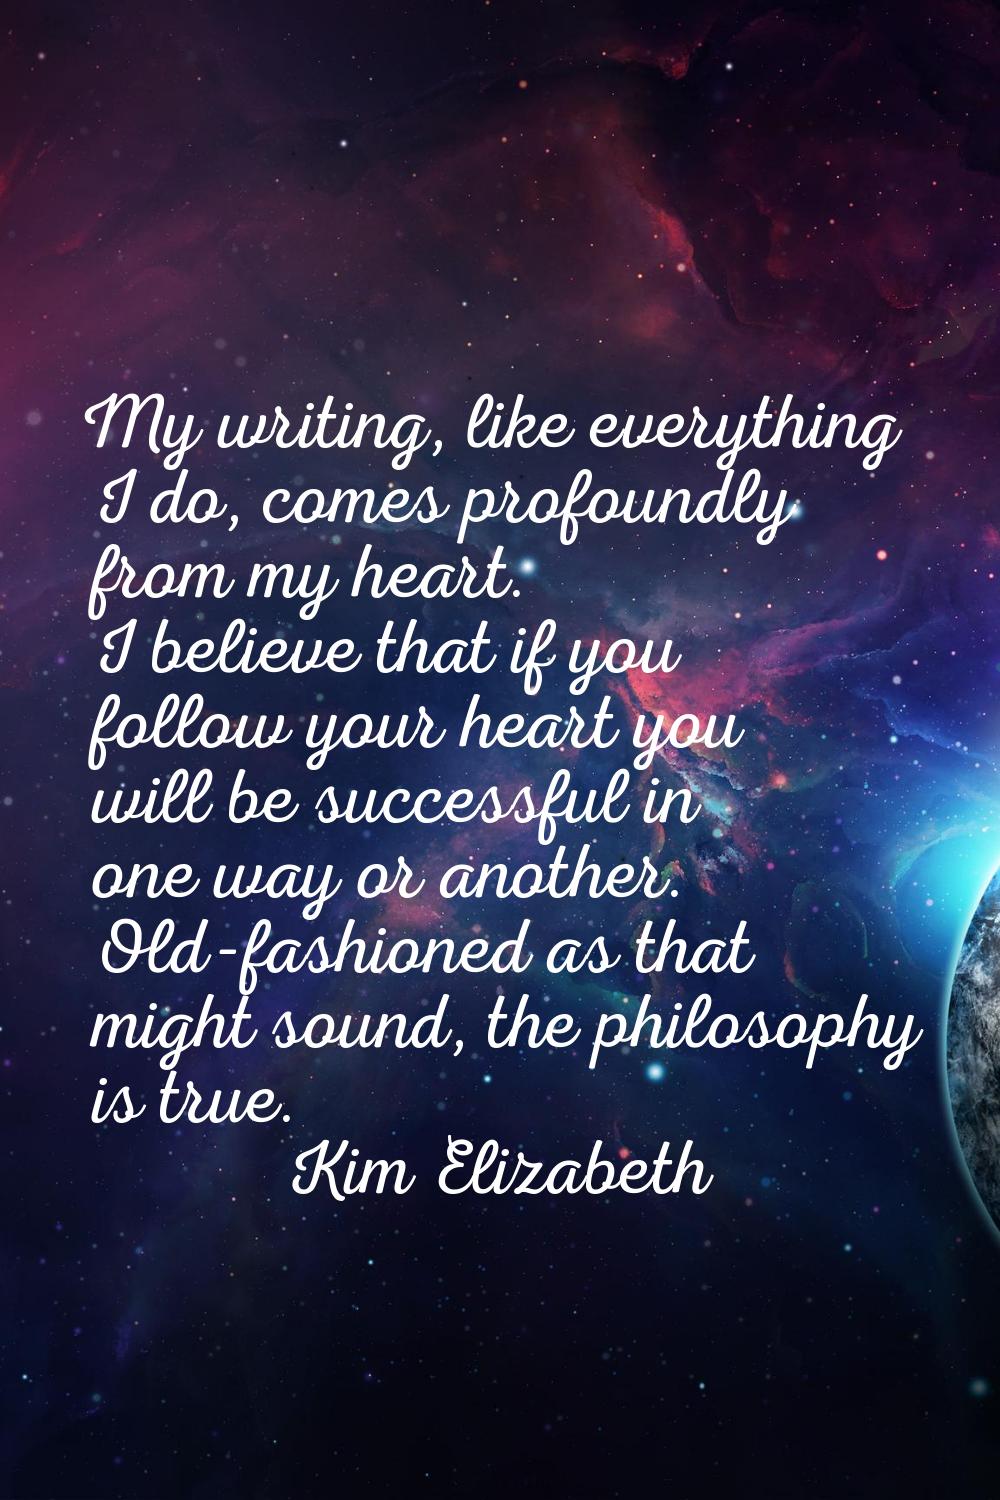 My writing, like everything I do, comes profoundly from my heart. I believe that if you follow your